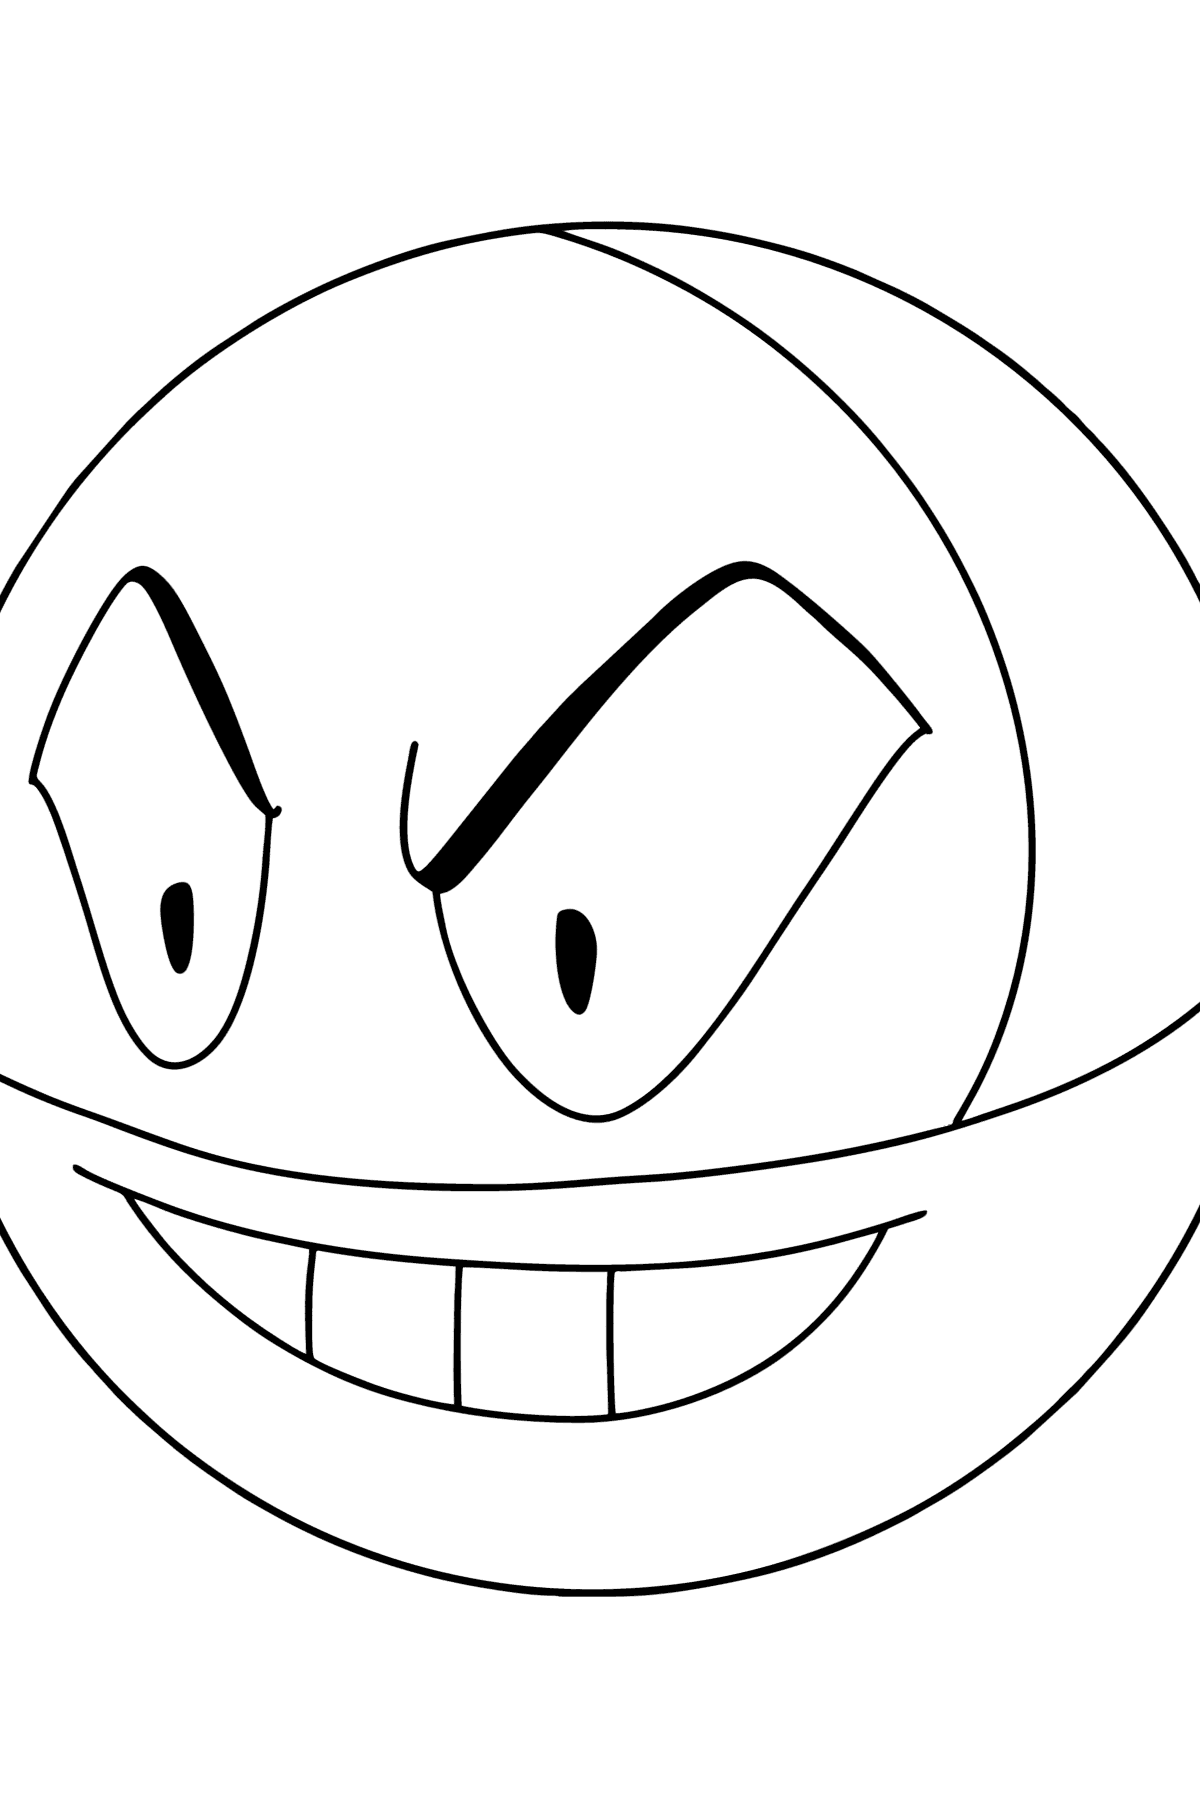 Pokemon Go Electrode coloring page - Coloring Pages for Kids